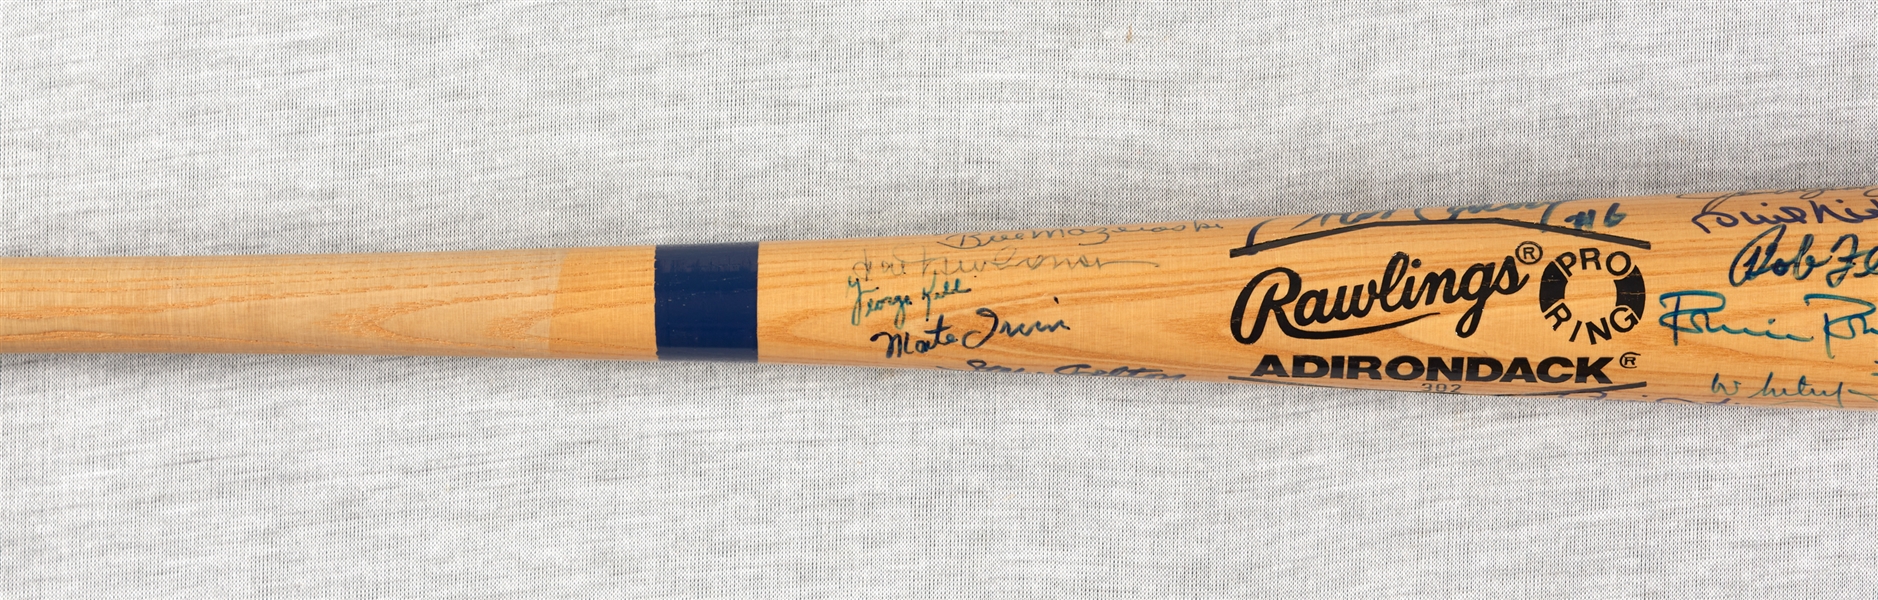 Hall of Famers Multi-Signed Rawlings Bat with Sandy Koufax, Berra, Banks (PSA/DNA)